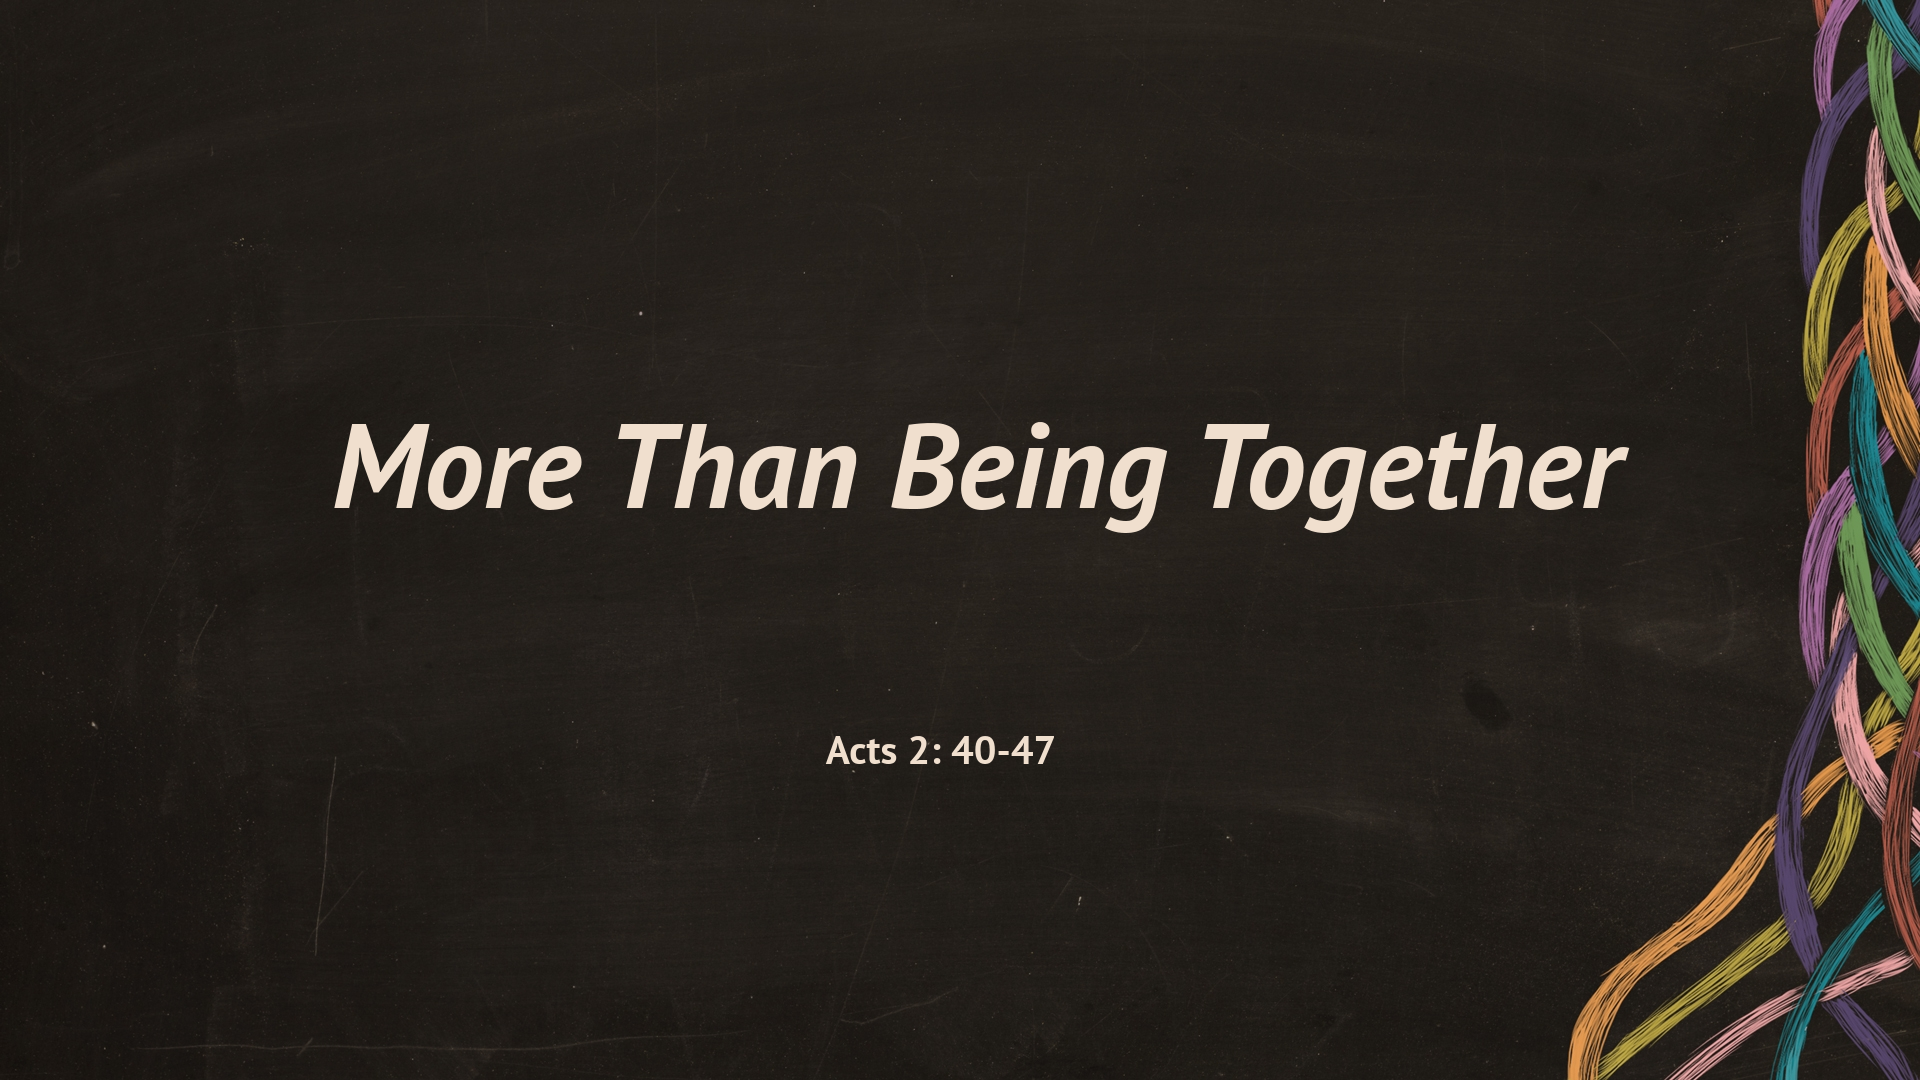 Apr 03, 2022 - More Than Being Together (Video)